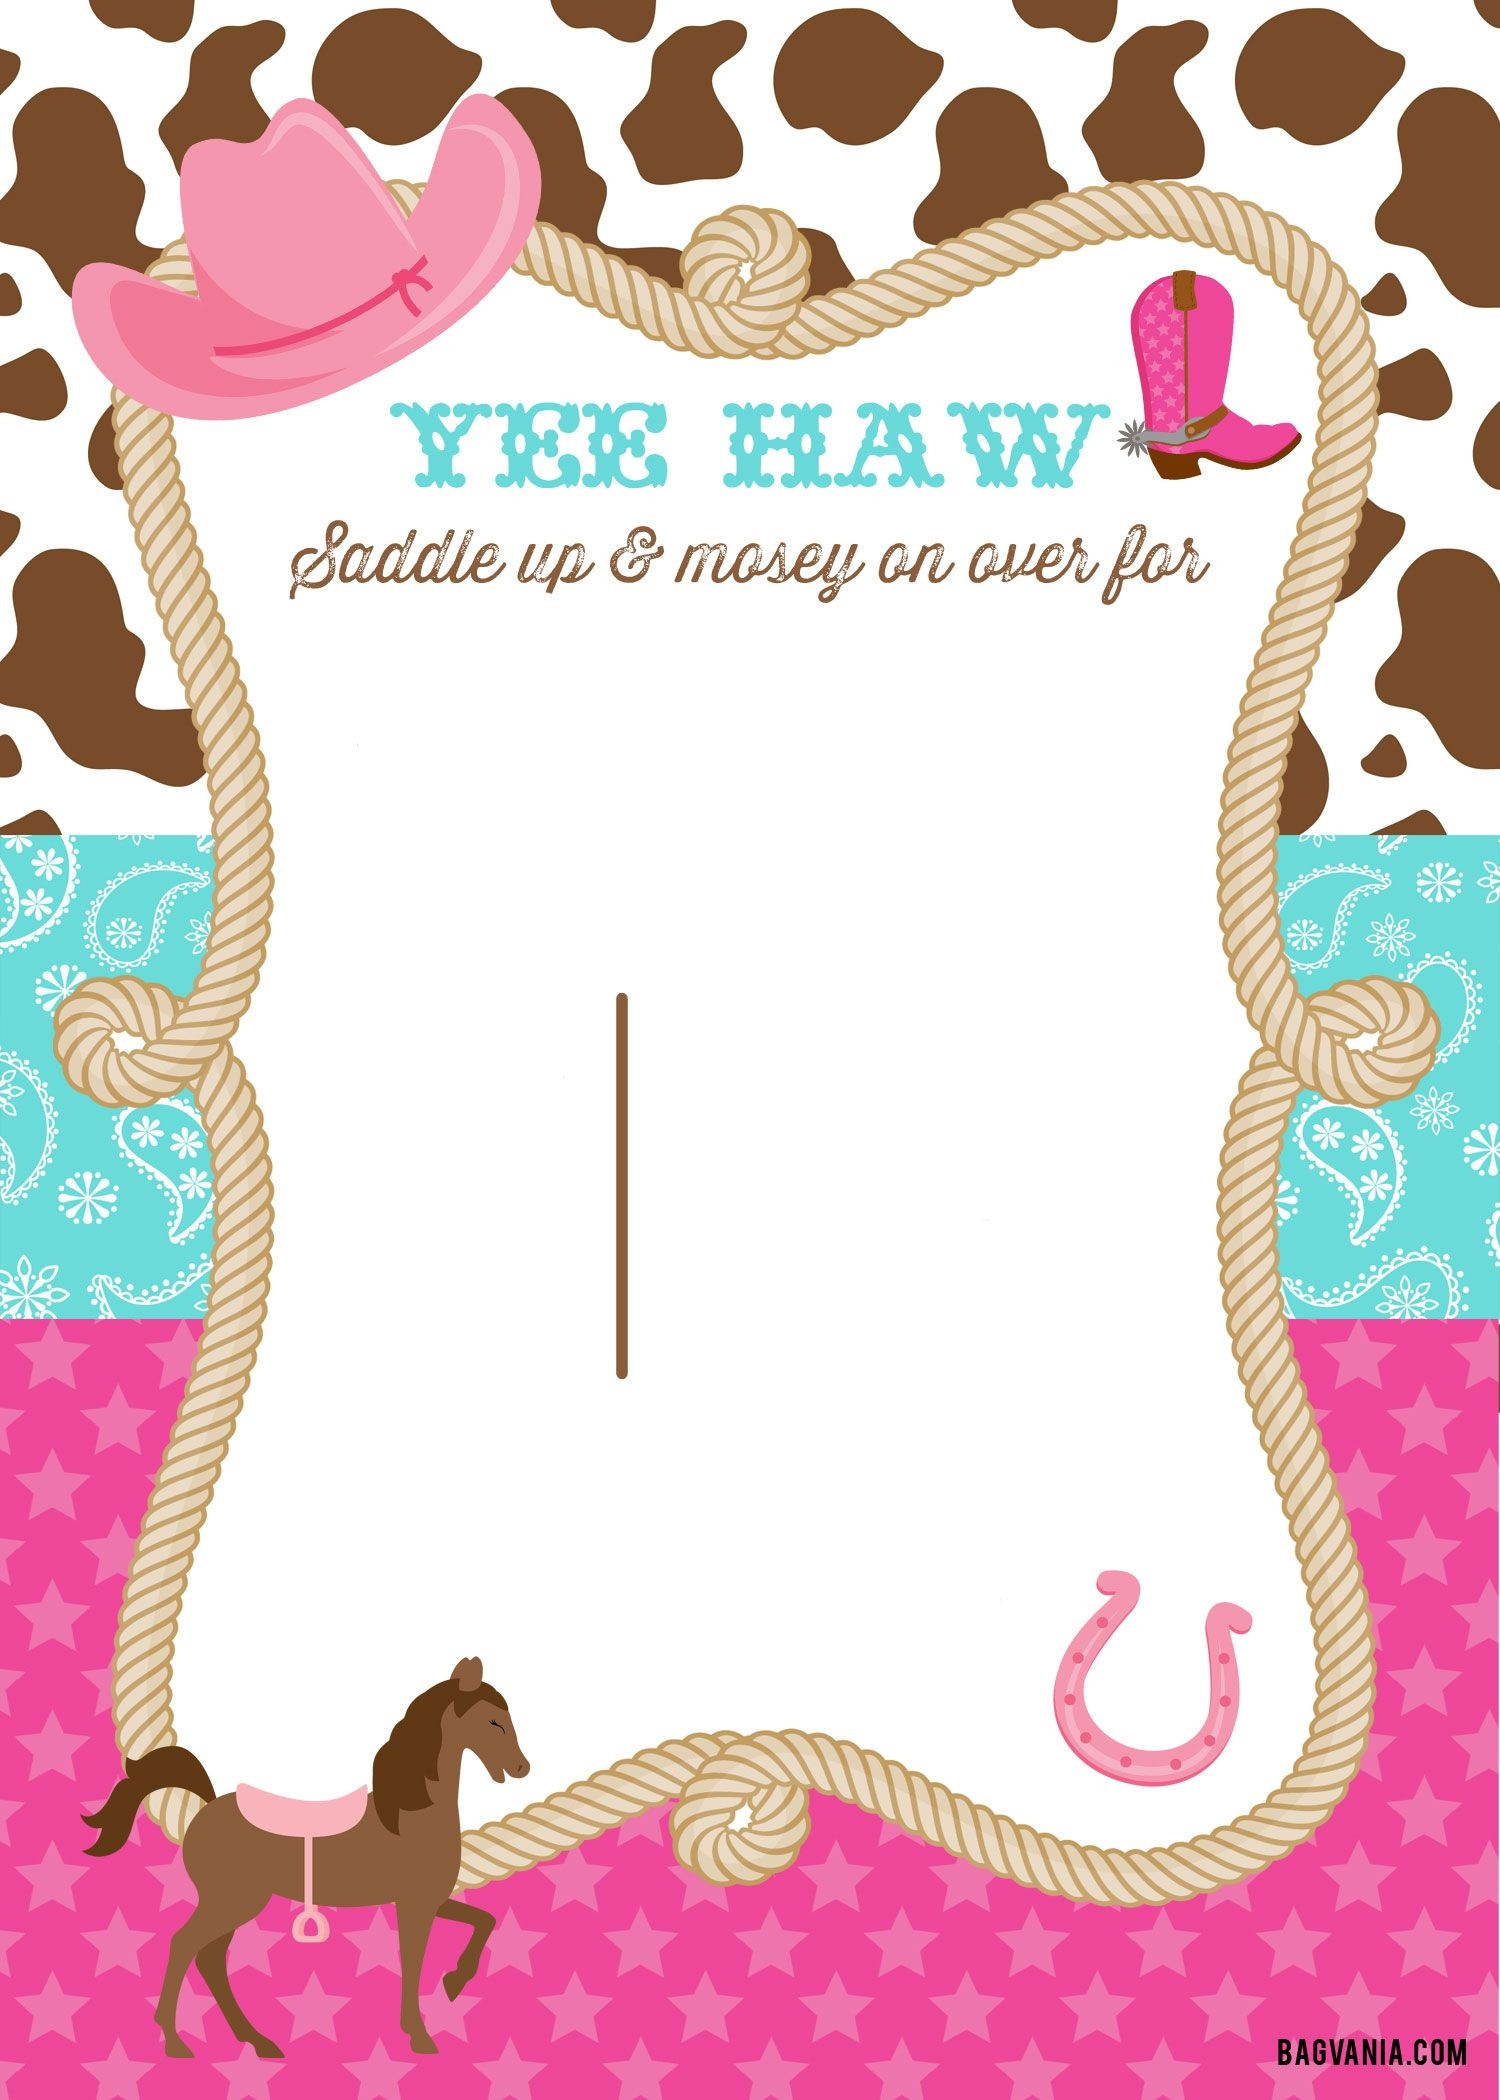 Pind.pattersaul On Peaches In 2019 | Cowgirl Birthday - Free Printable Cow Birthday Invitations